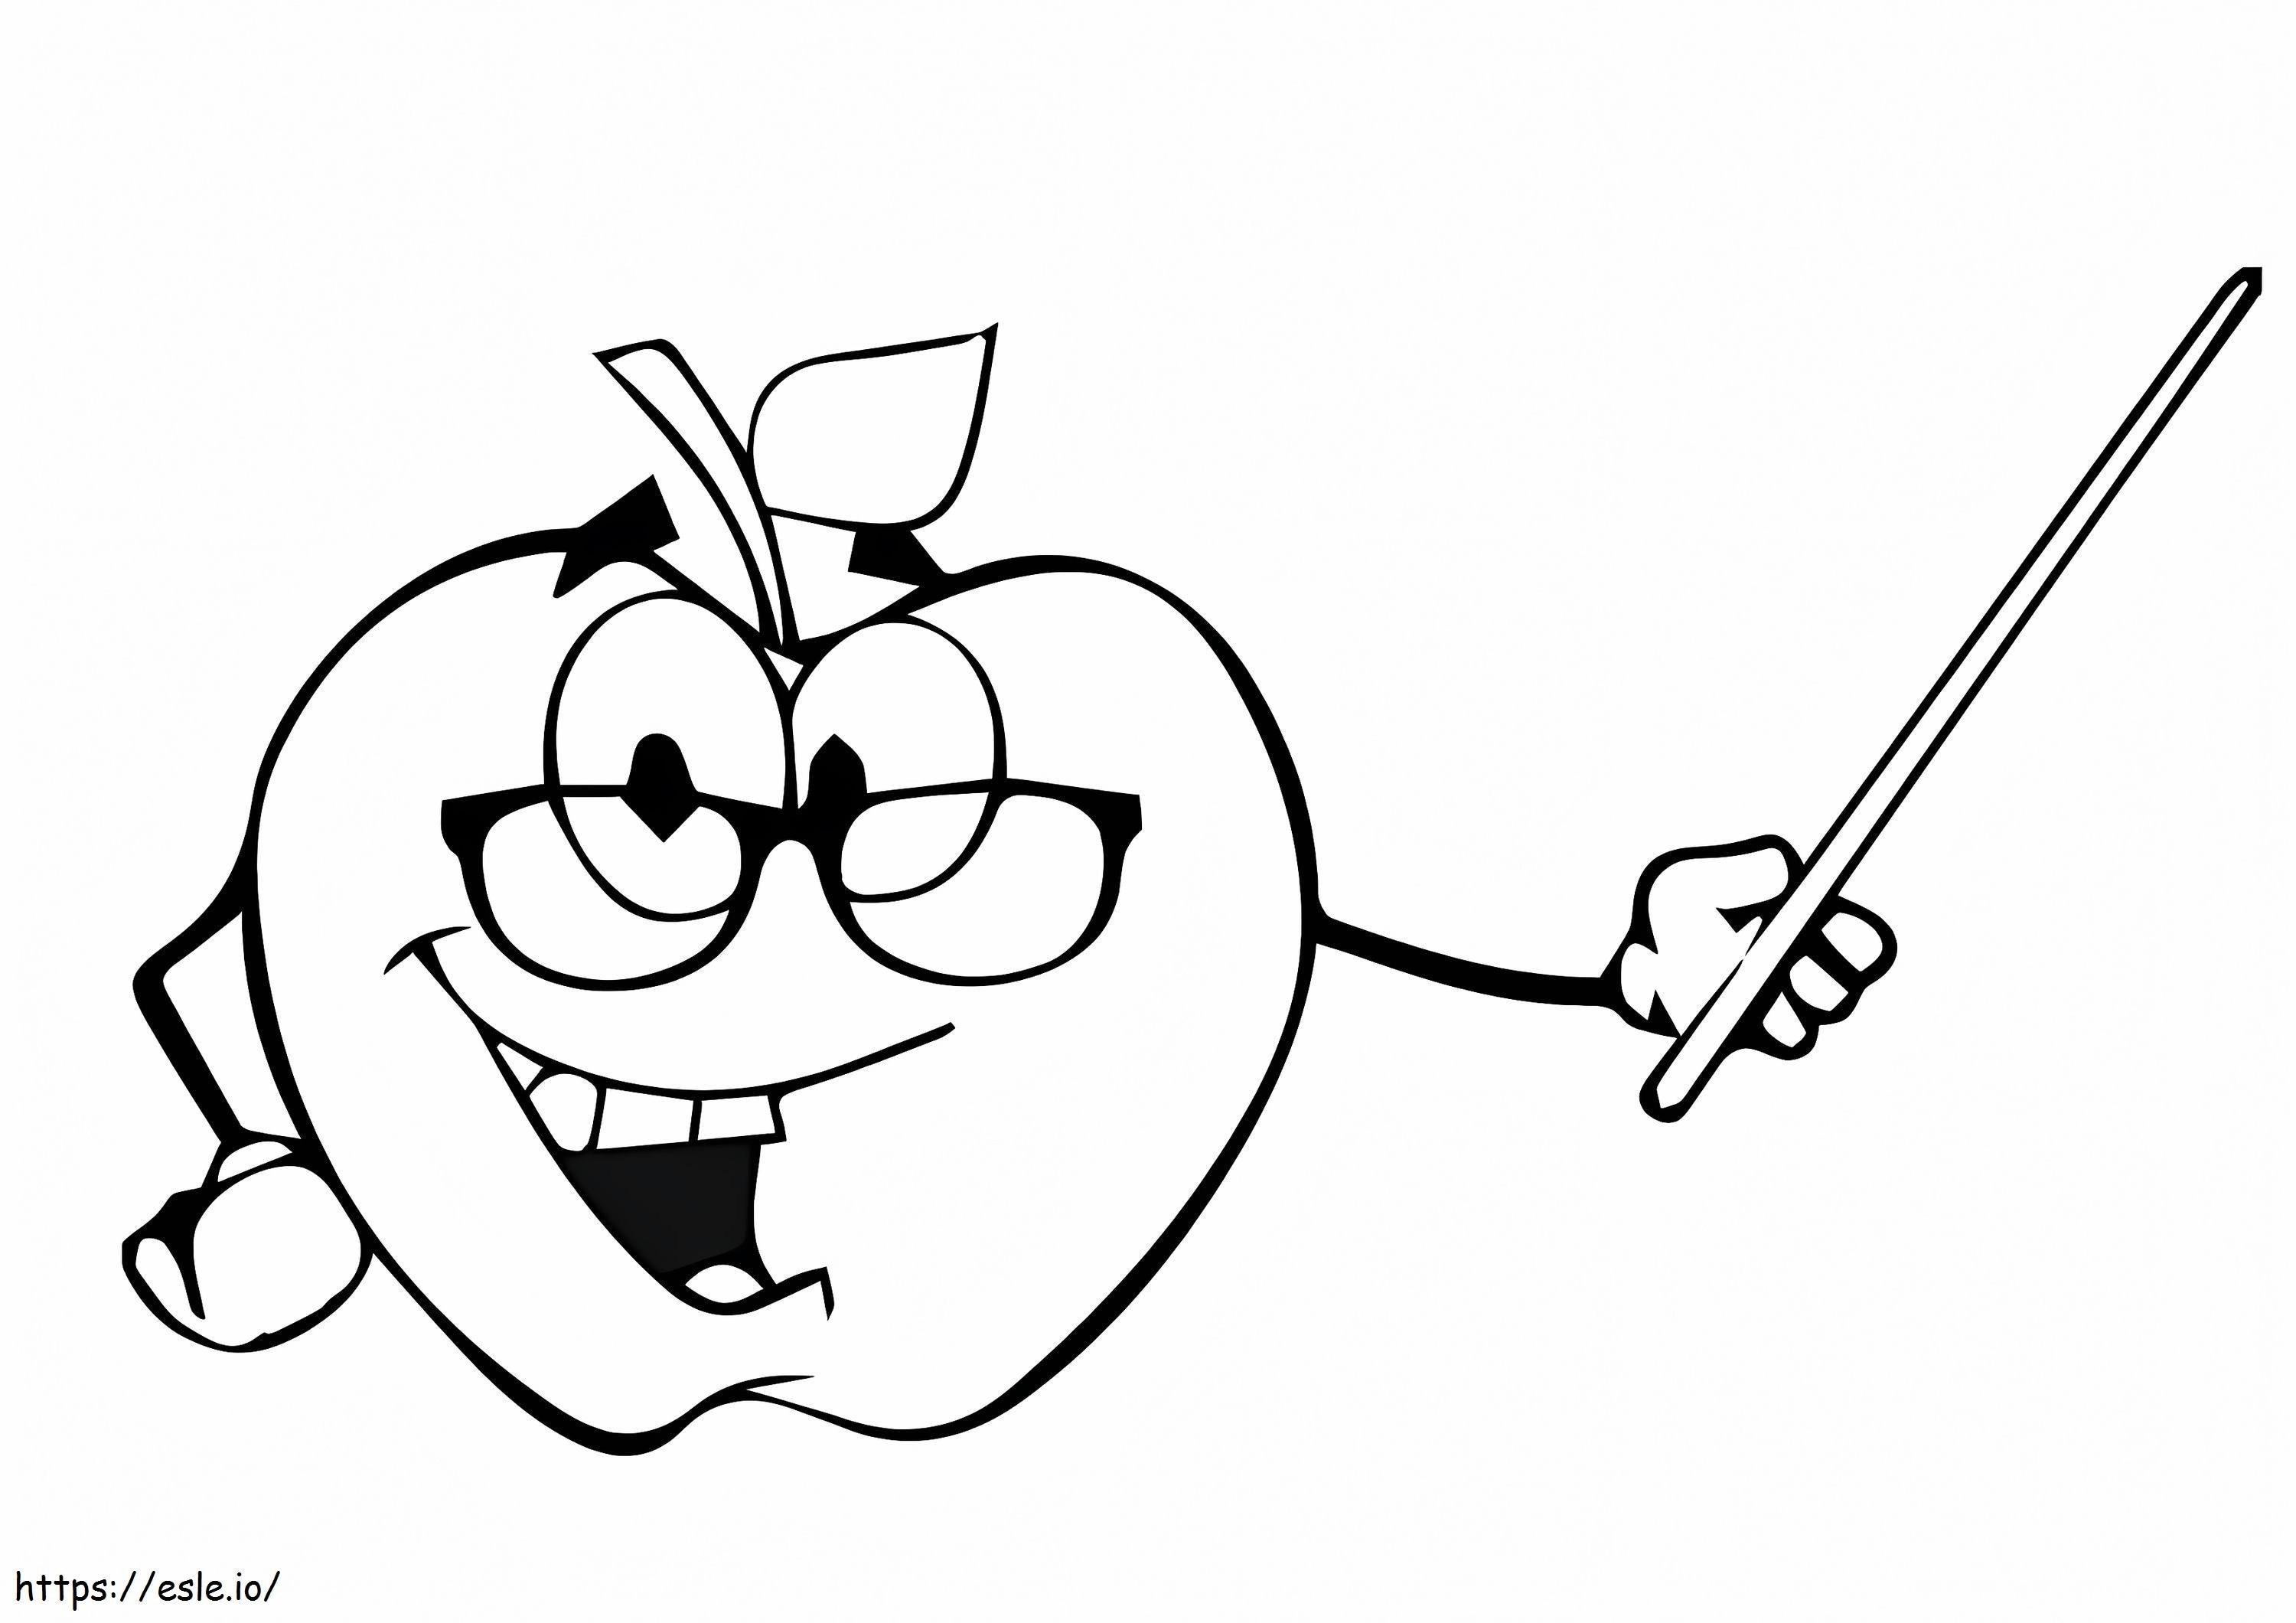 Apple Professor coloring page